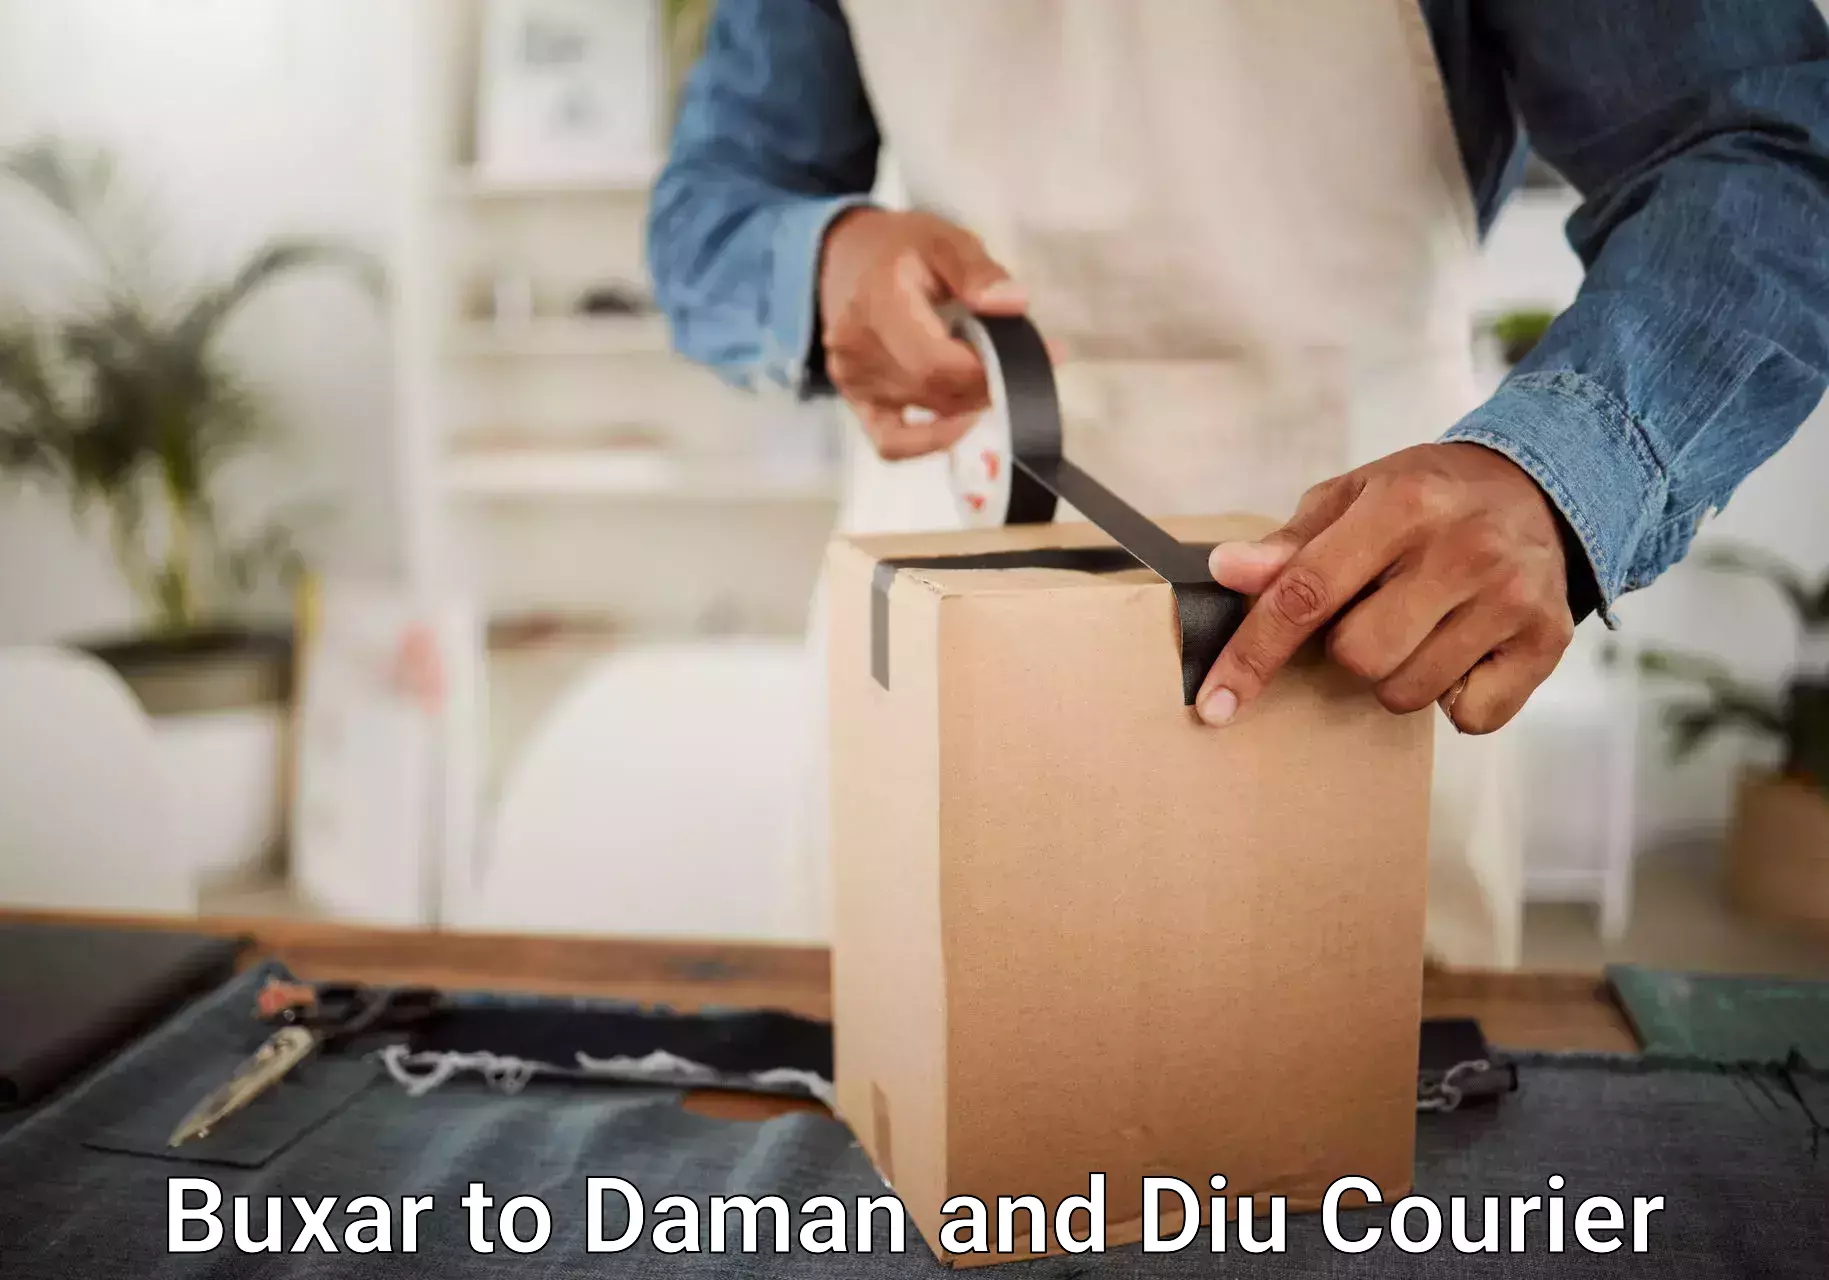 Luggage delivery system Buxar to Daman and Diu